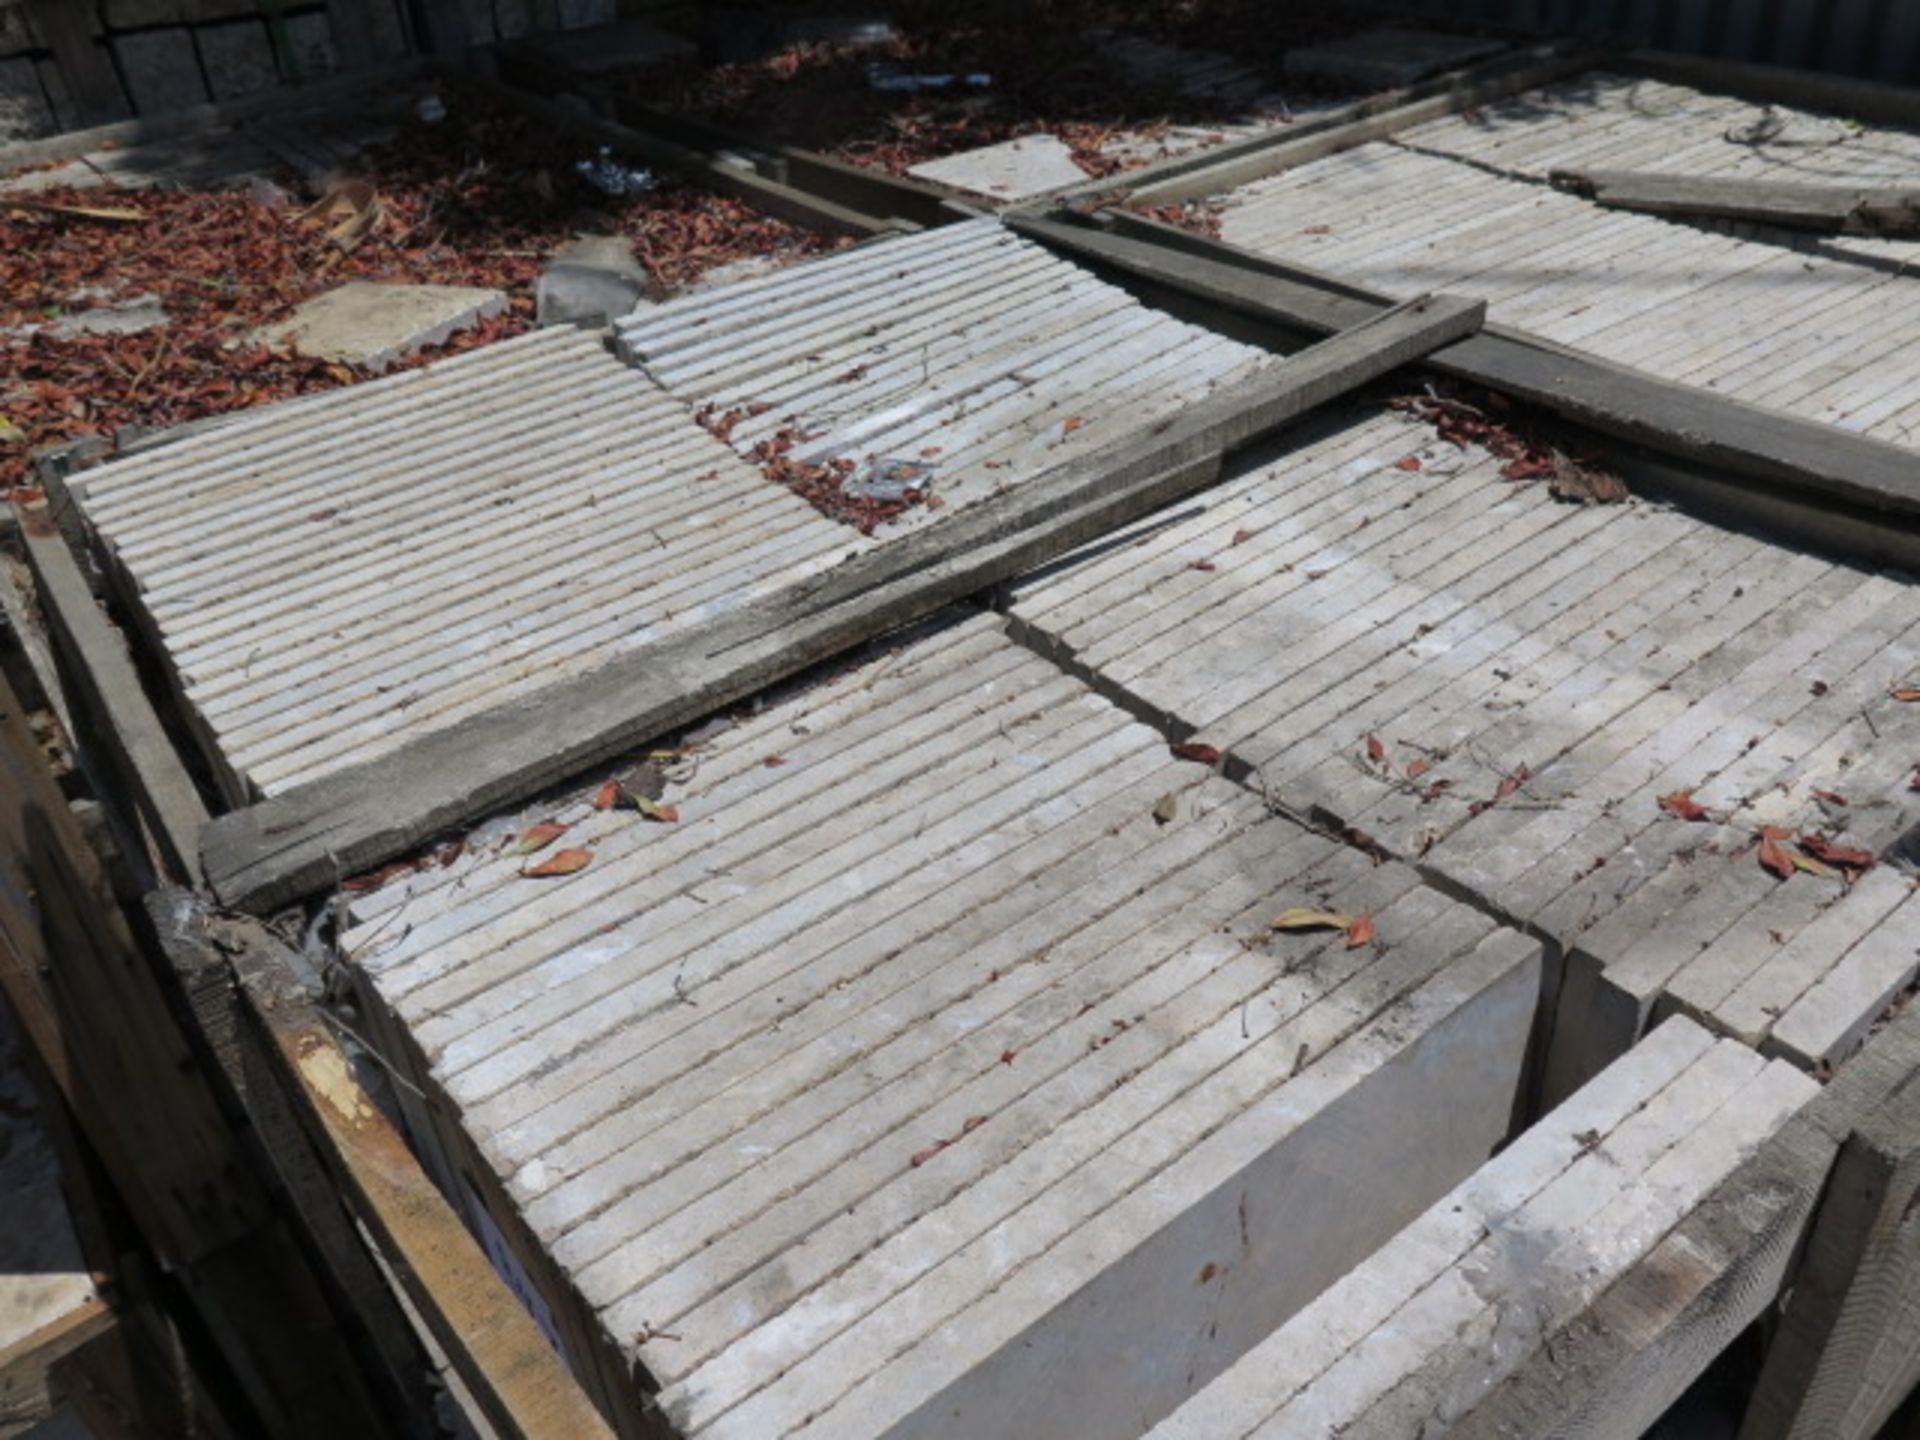 16" x 16" Travertine Tiles (6 Pallets) (SOLD AS-IS - NO WARRANTY) - Image 4 of 7